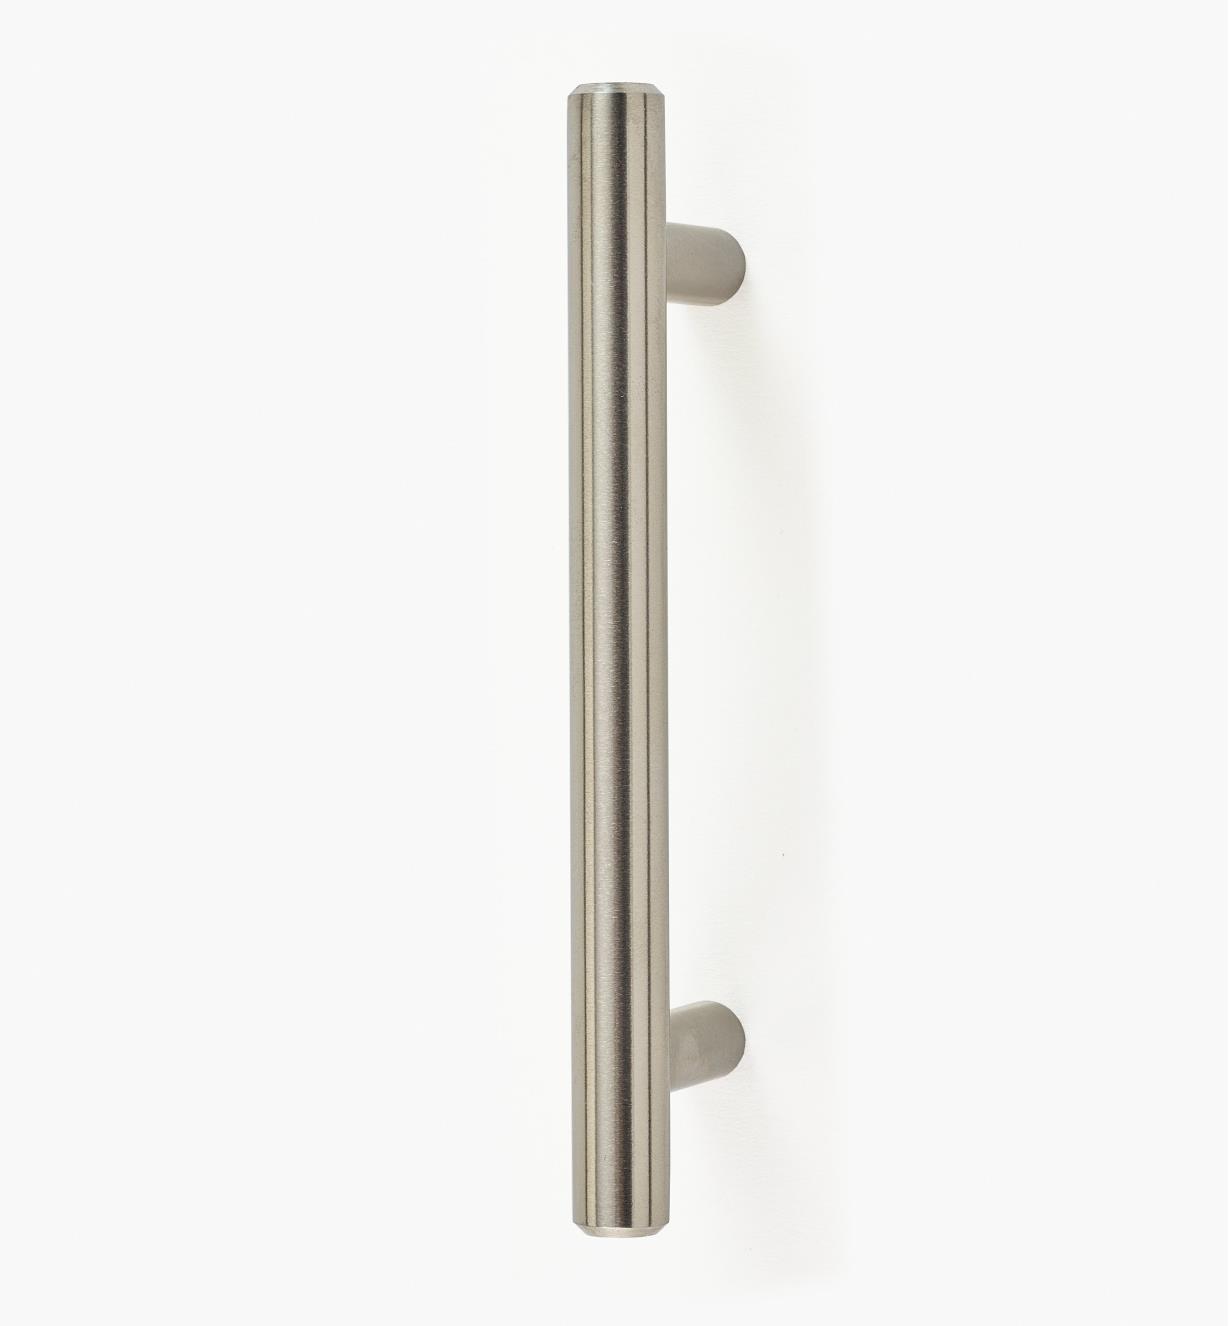 01W8310 - 136mm (5 3/8") Stainless Steel Bar Handle